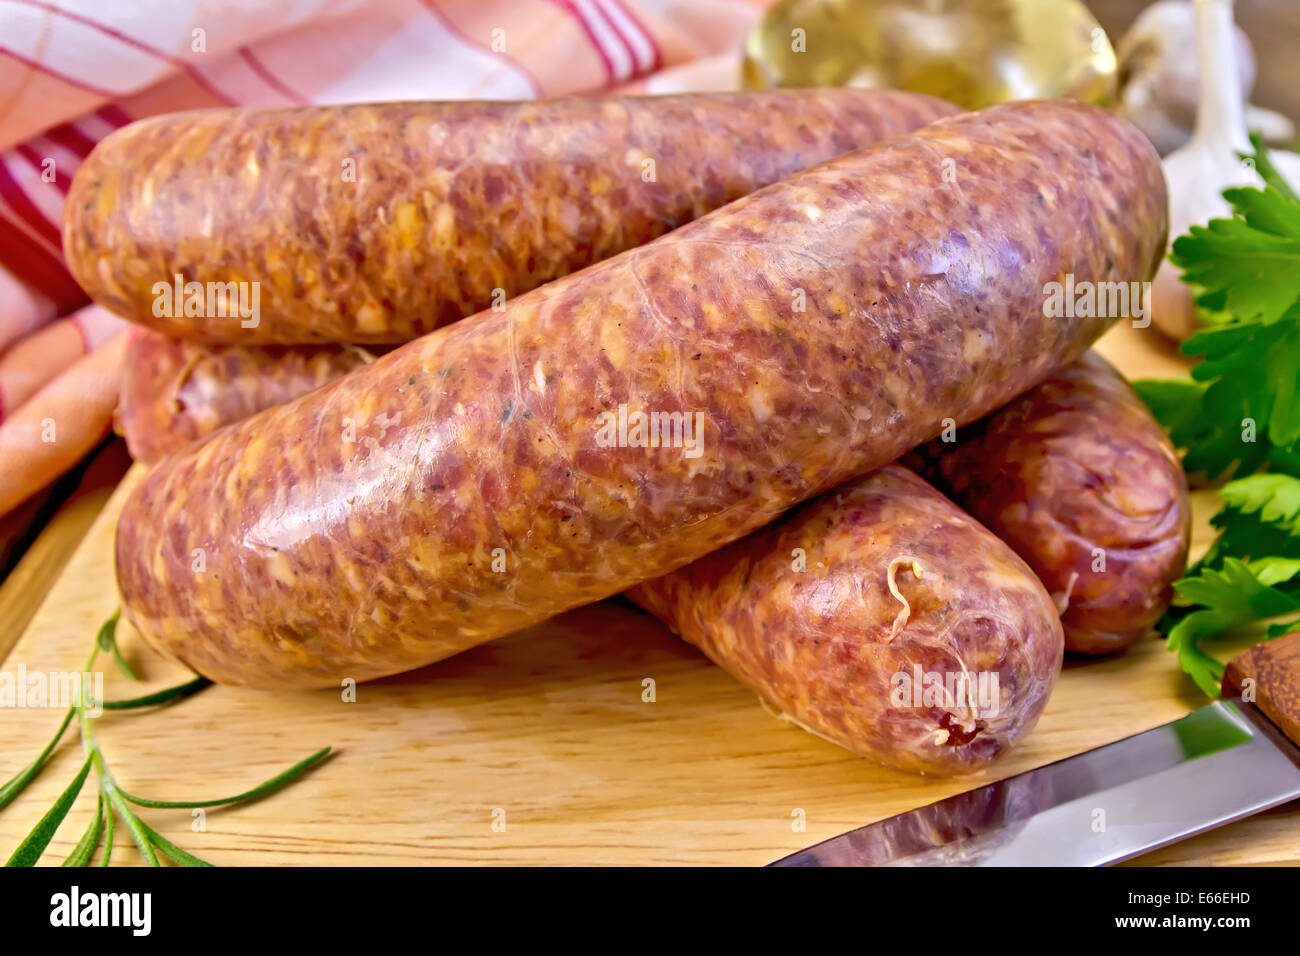 Raw beef sausage, knife, rosemary, parsley, vegetable oil and a napkin on the background of wooden boards Stock Photo